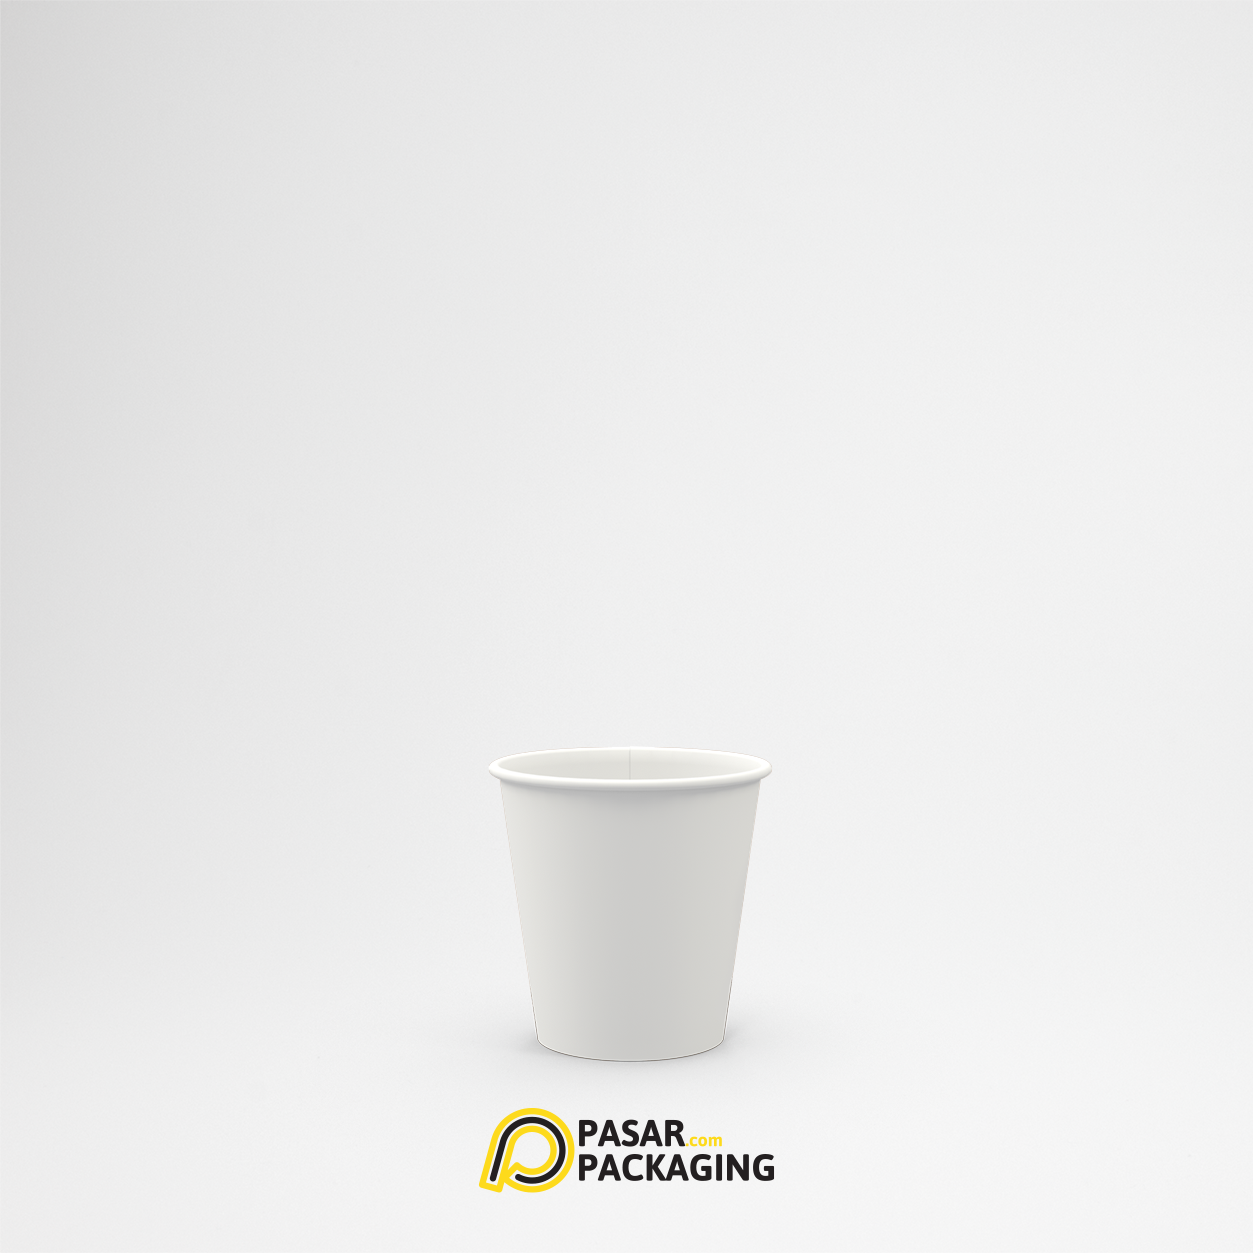 4oz Hot Paper Cup - Pasar Packaging